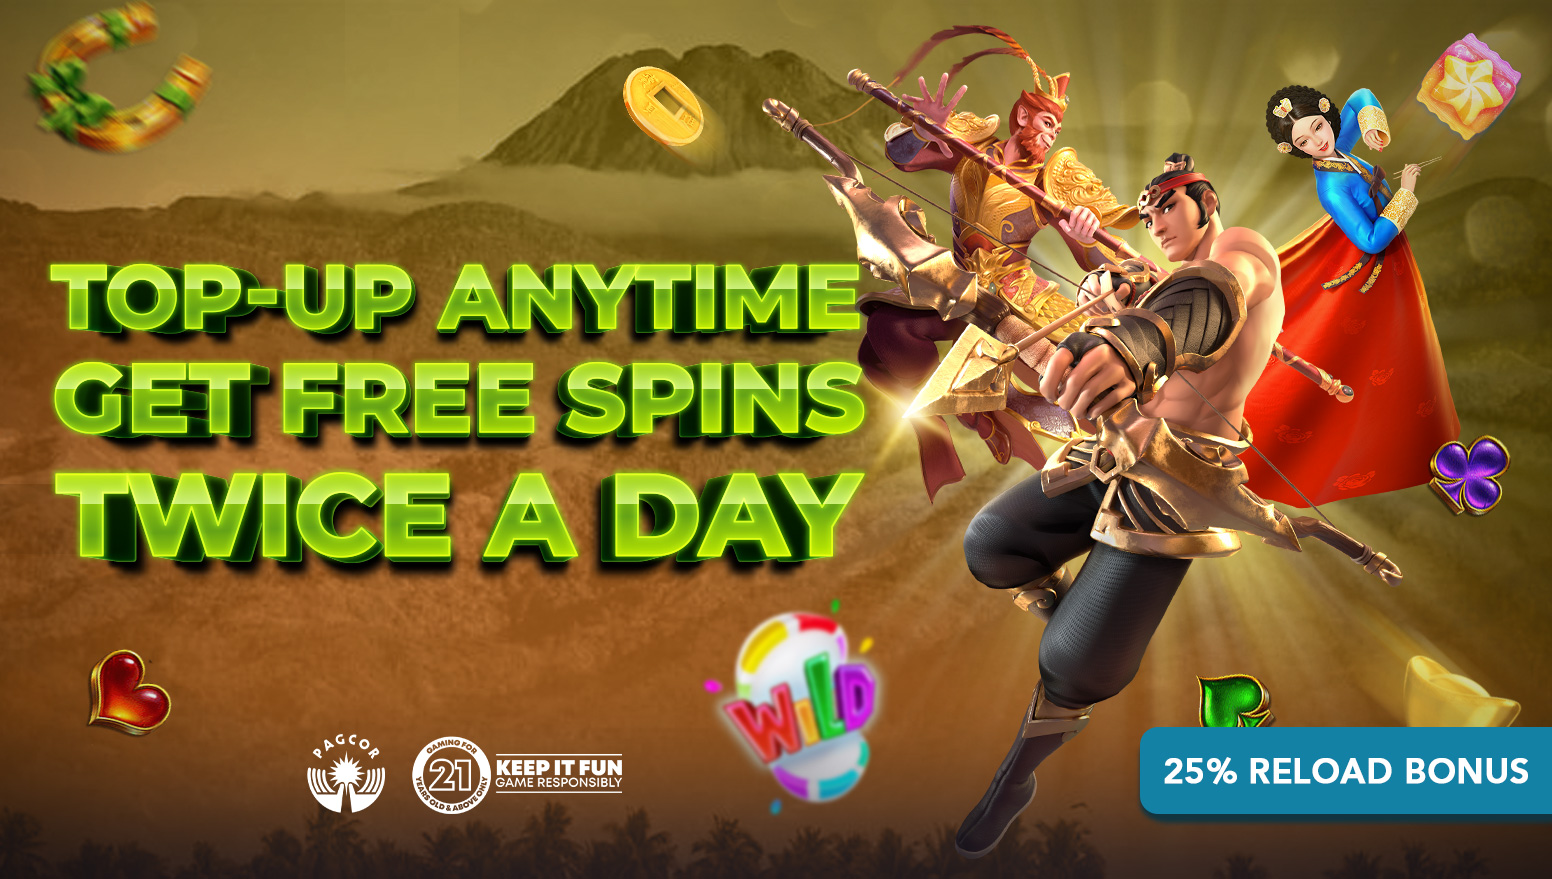 Top up anytime, get free spins TWICE a day (25% reload bonus 2x per day)